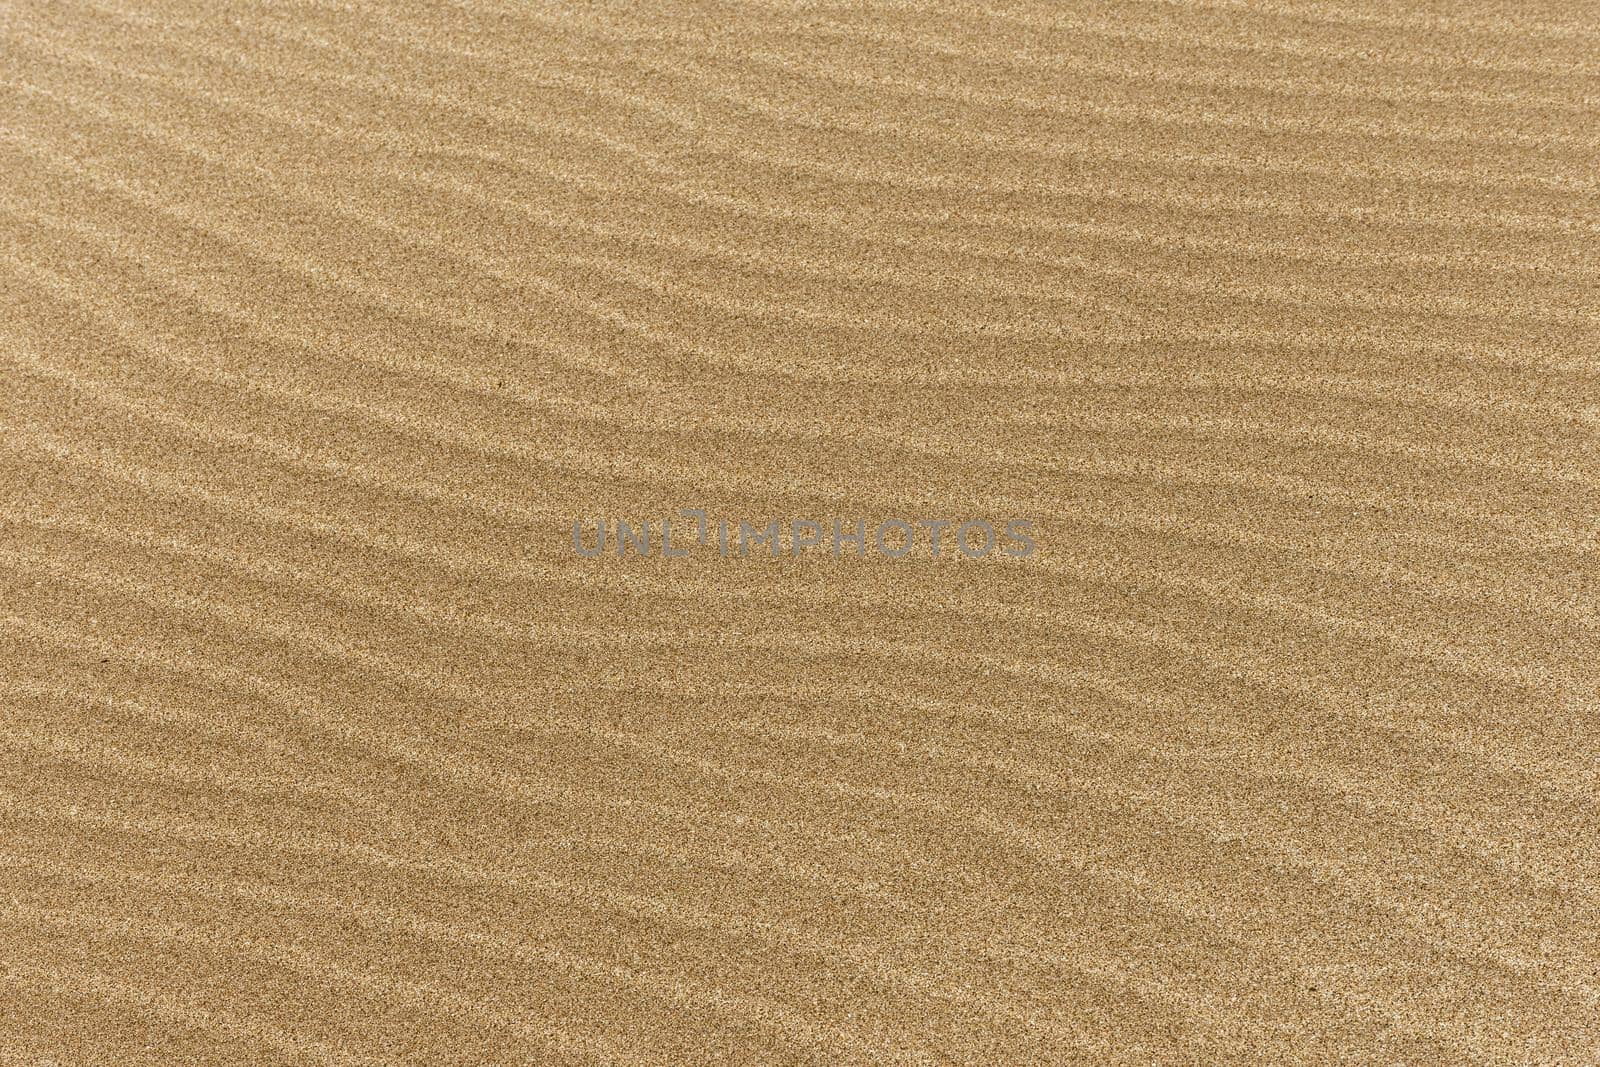 fine beach sand with waves. High quality beautiful photo concept by Zahard